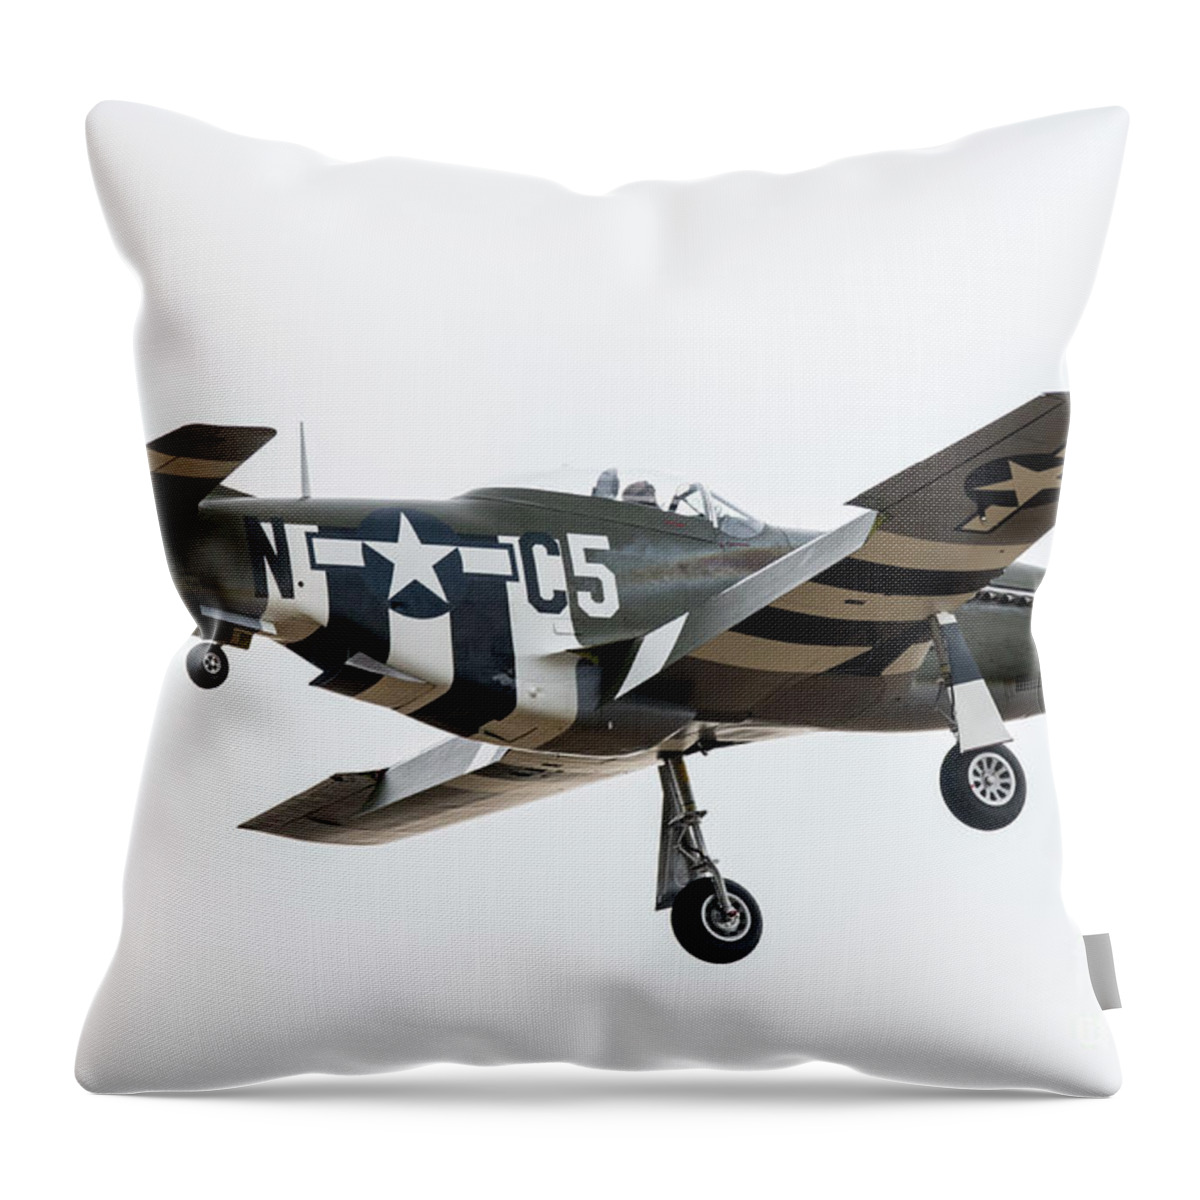 P51 Throw Pillow featuring the digital art P-51 Mustang - Frensi by Airpower Art